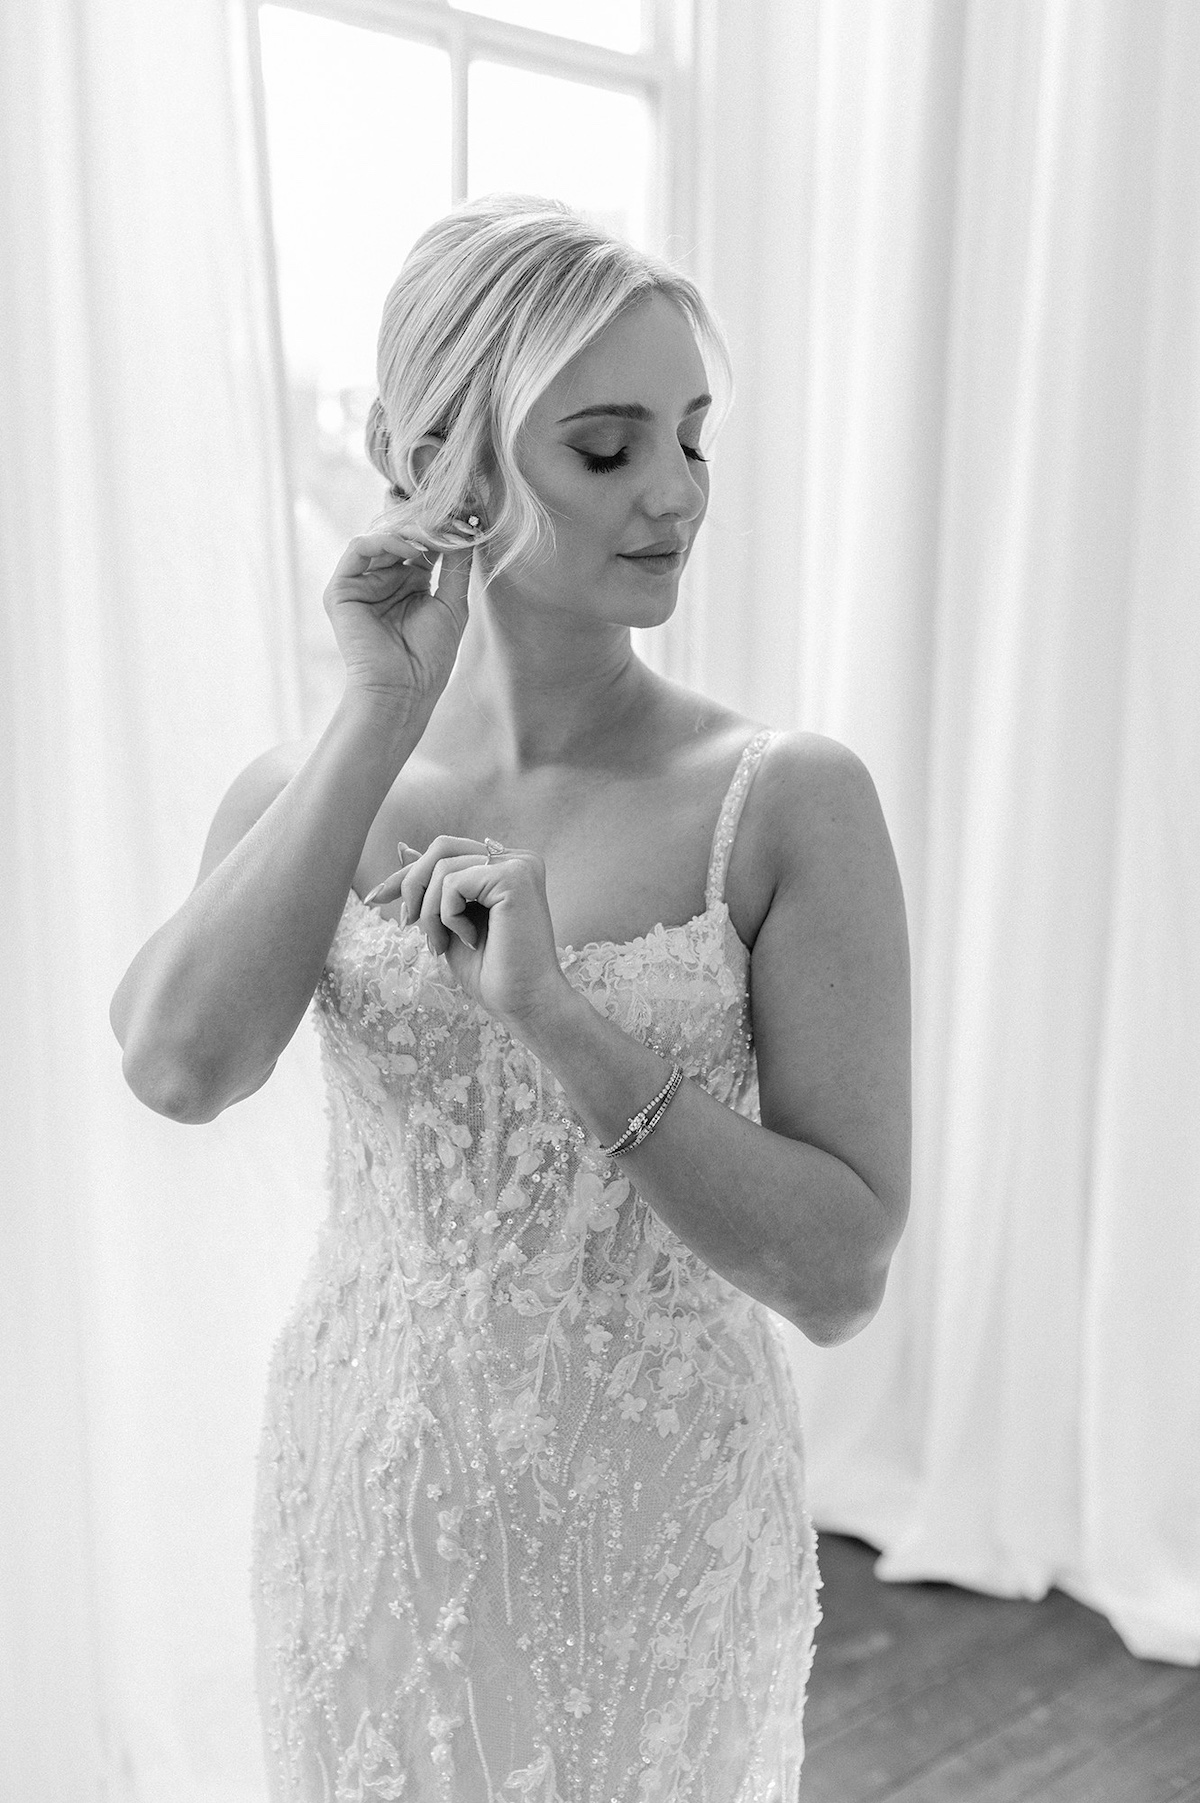 An editorial approach to the bride's dressing ritual, unveiling layers of opulence in preparation for the grand moment.